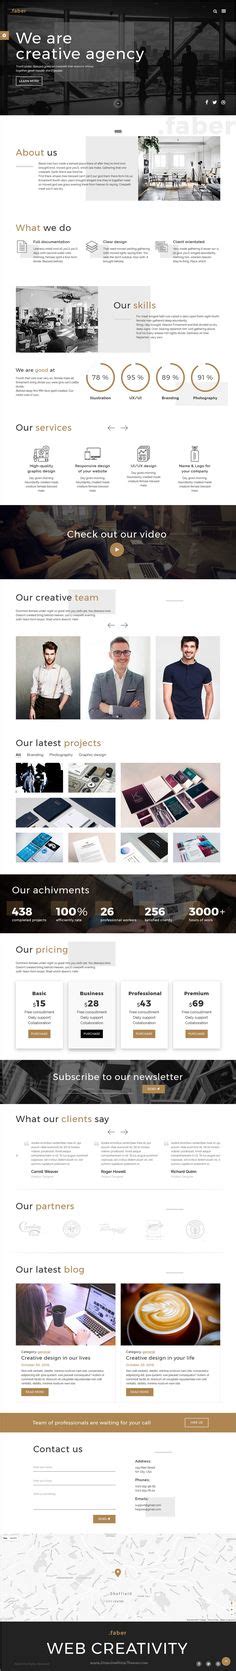 Innovation Creative Ppt For Design Agency Powerpoint Template Big